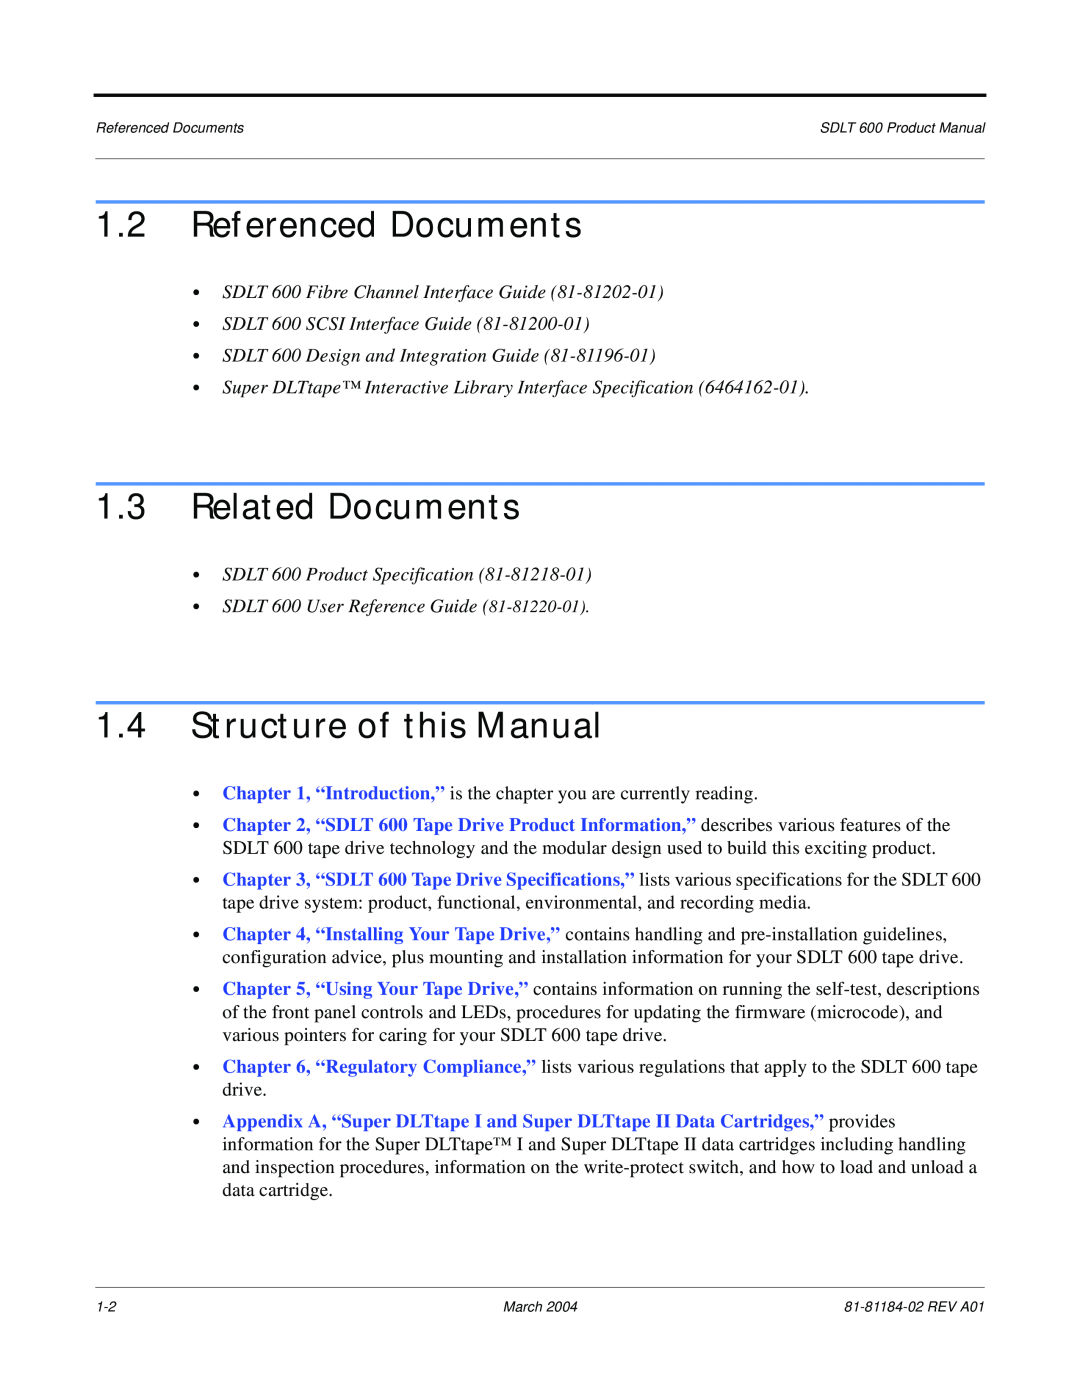 Tandberg Data 600 manual Referenced Documents, Related Documents, Structure of this Manual 